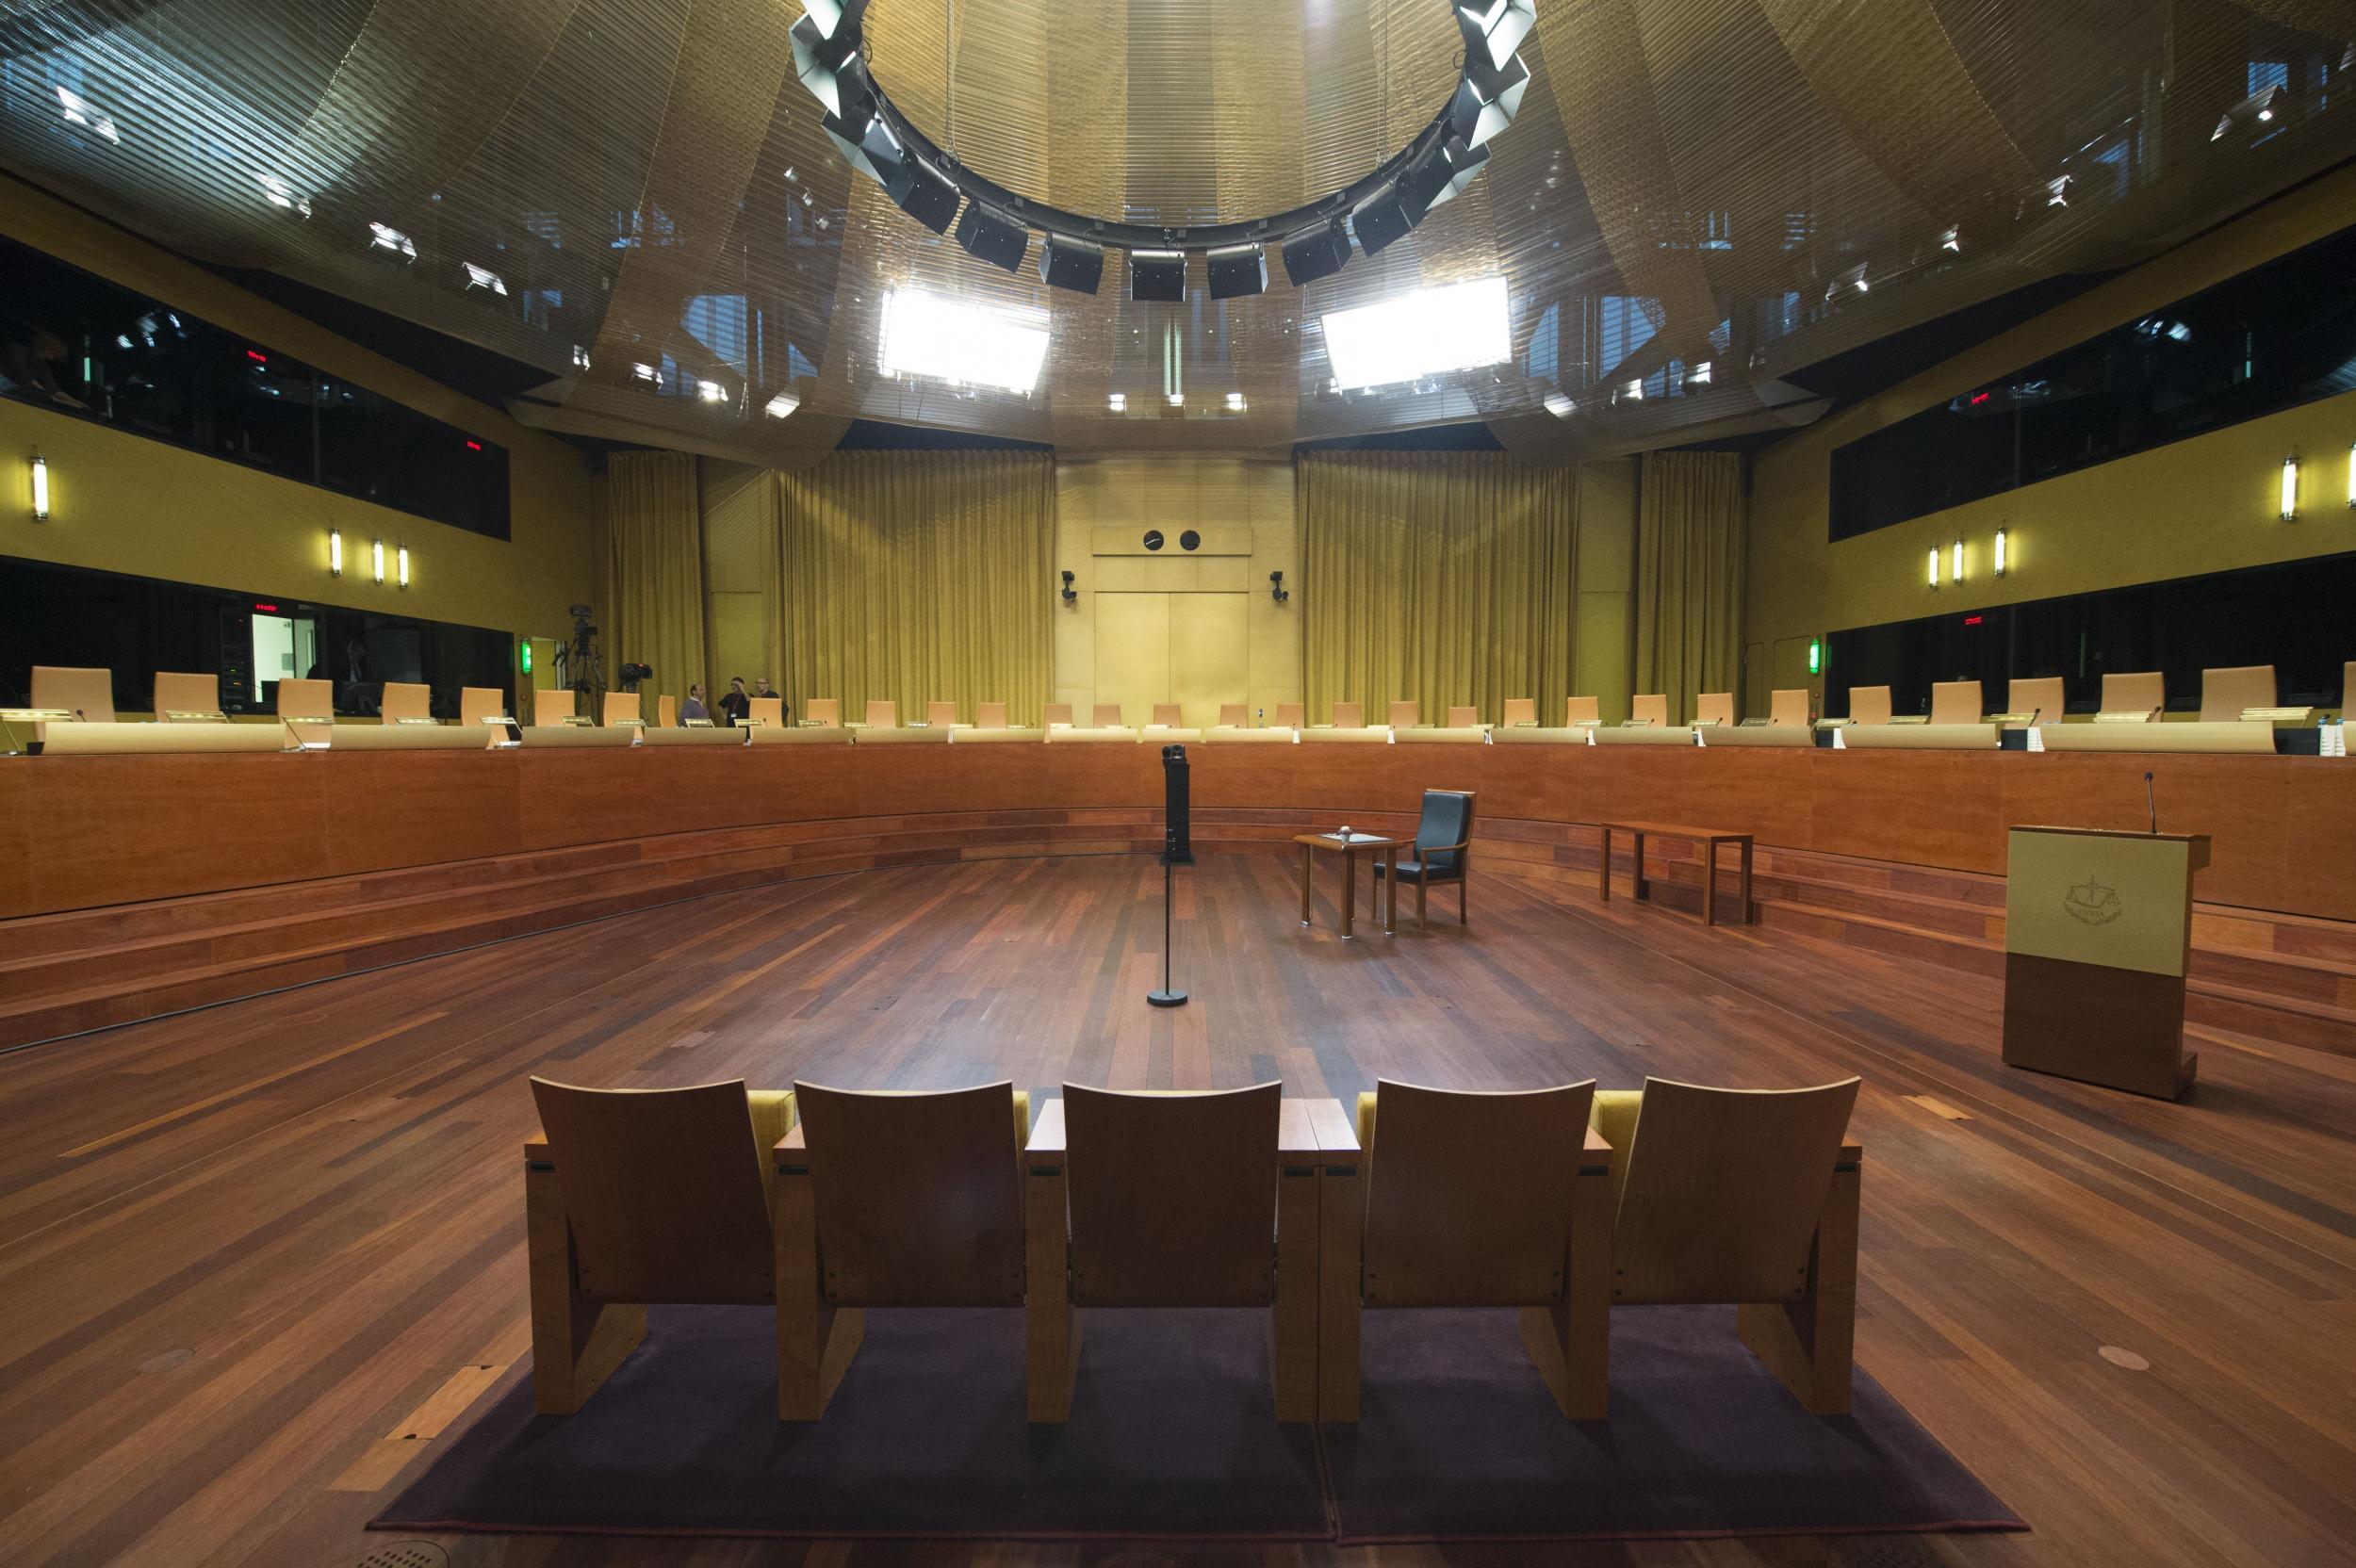 The Court of Justice of the European Union in Luxembourg